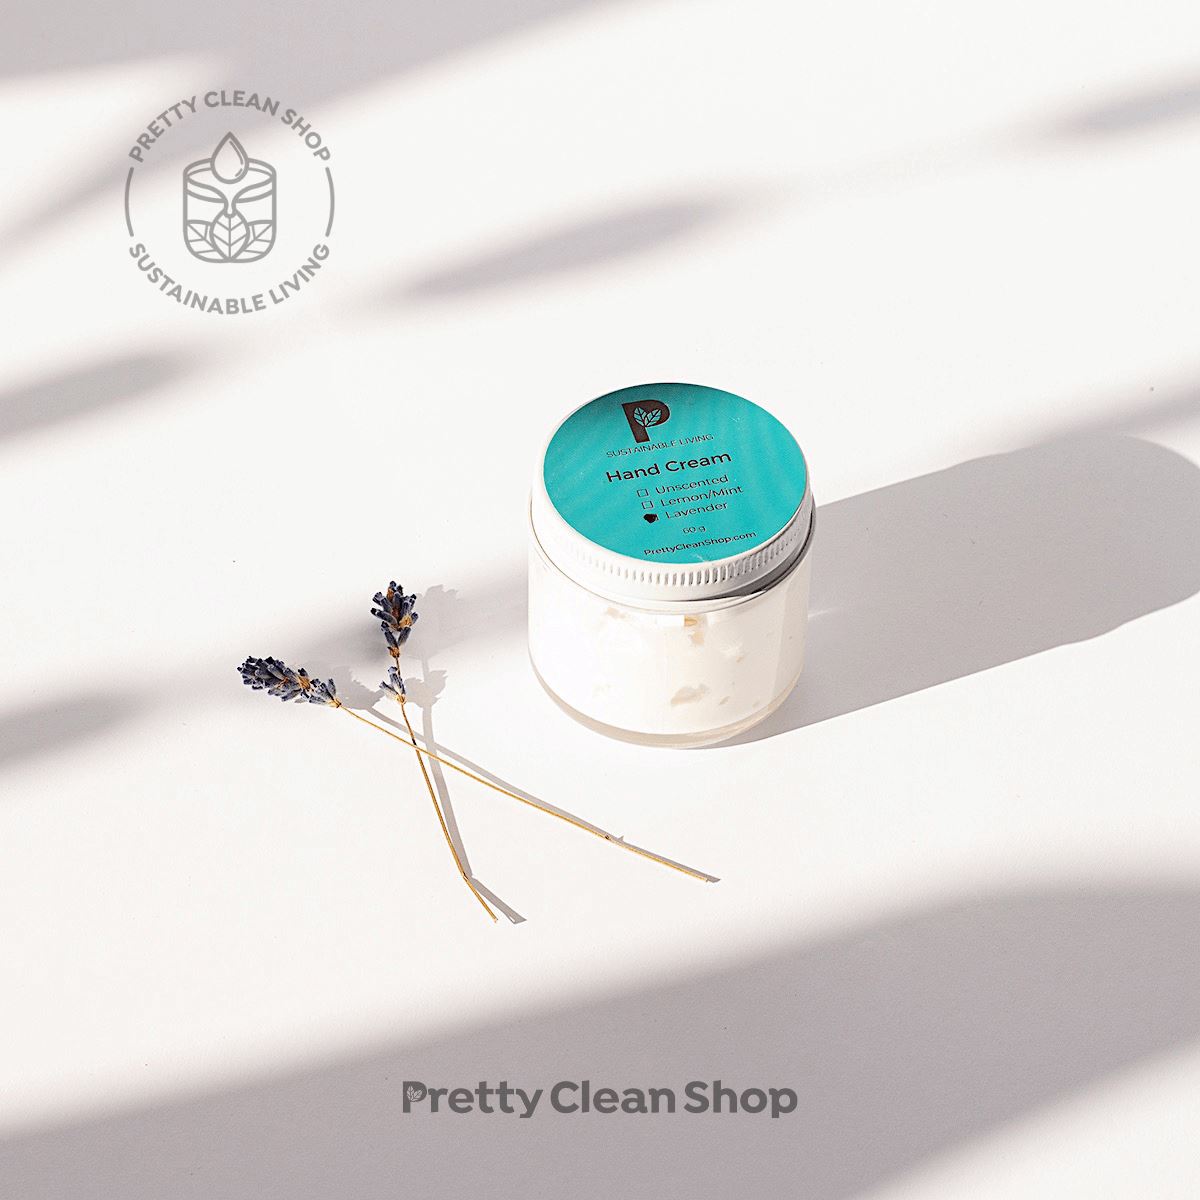 Hand Cream Bath and Body Pretty Clean Living 60ml RETURNABLE glass jar includes $1.25 deposit / French Lavender Prettycleanshop